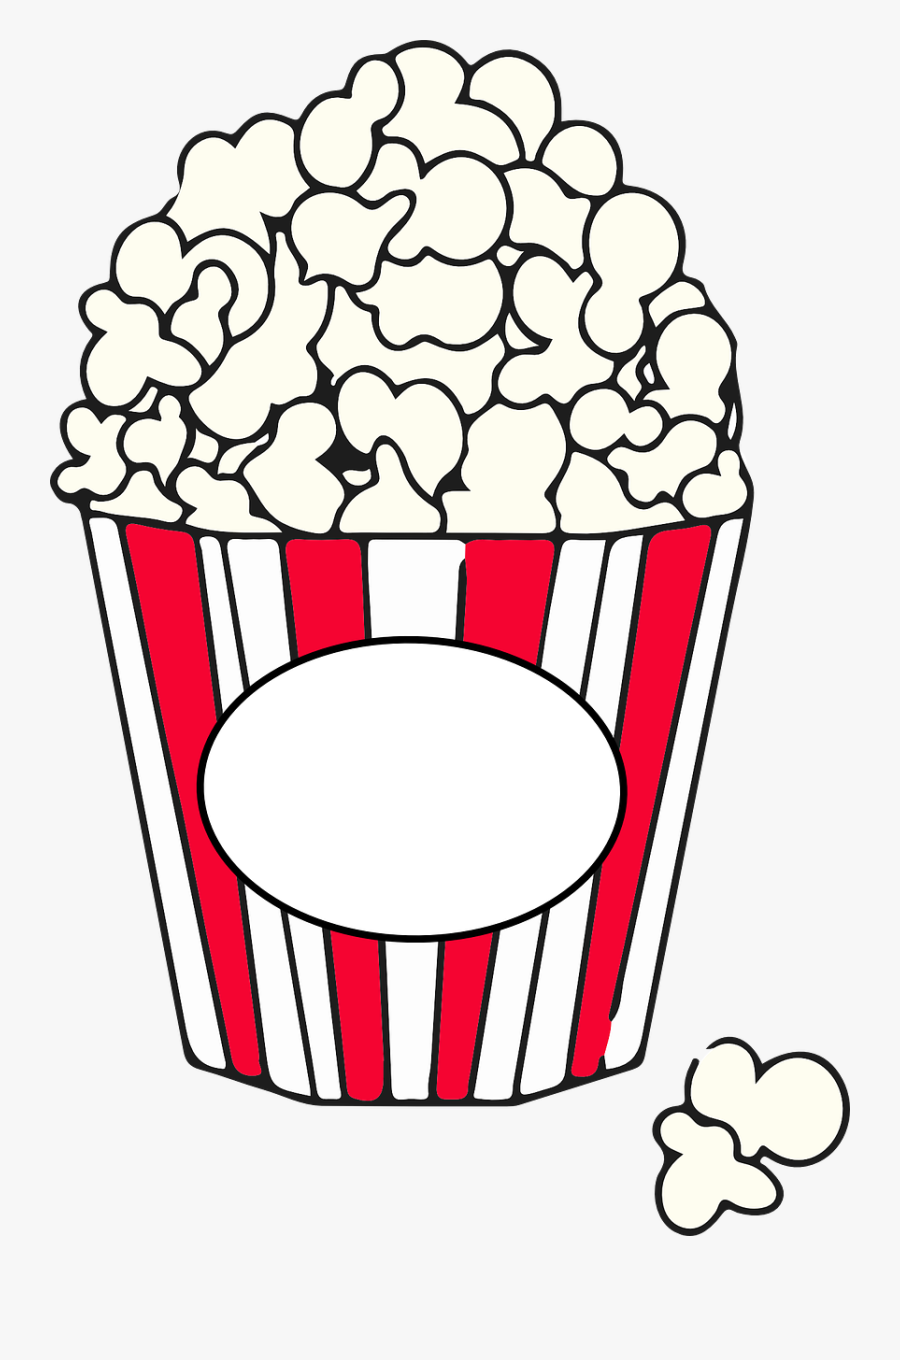 Popcorn Free To Use Clipart - Pop Corn Clipart, Transparent Clipart